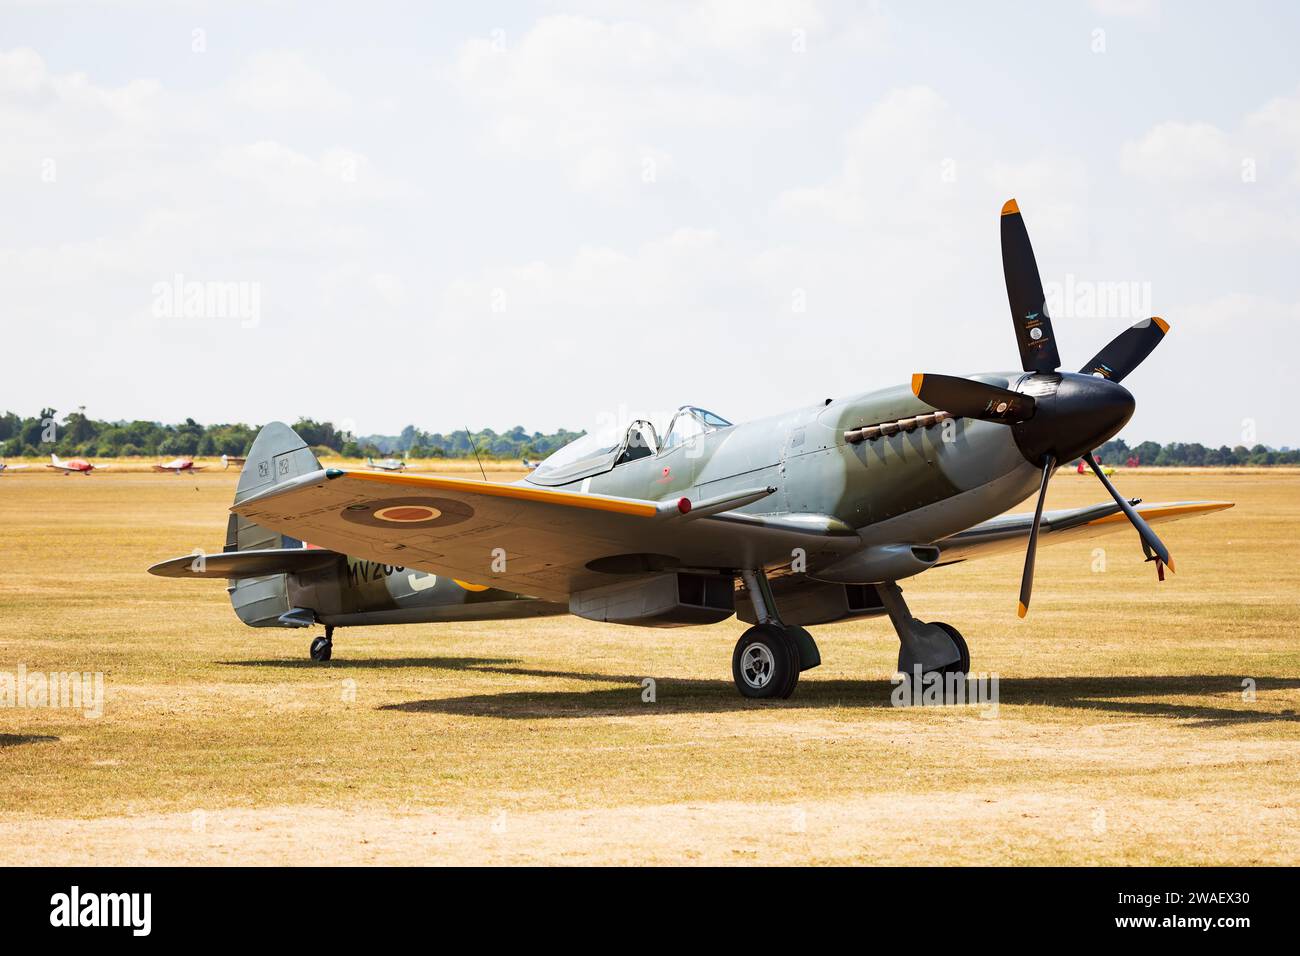 Supermarine Spitfire FRXIV, clipped wing, mv268, G-SPIT, static Imperial War Museum, Duxford airfield, Cambridge, Cambridgeshire, England. July Stock Photo